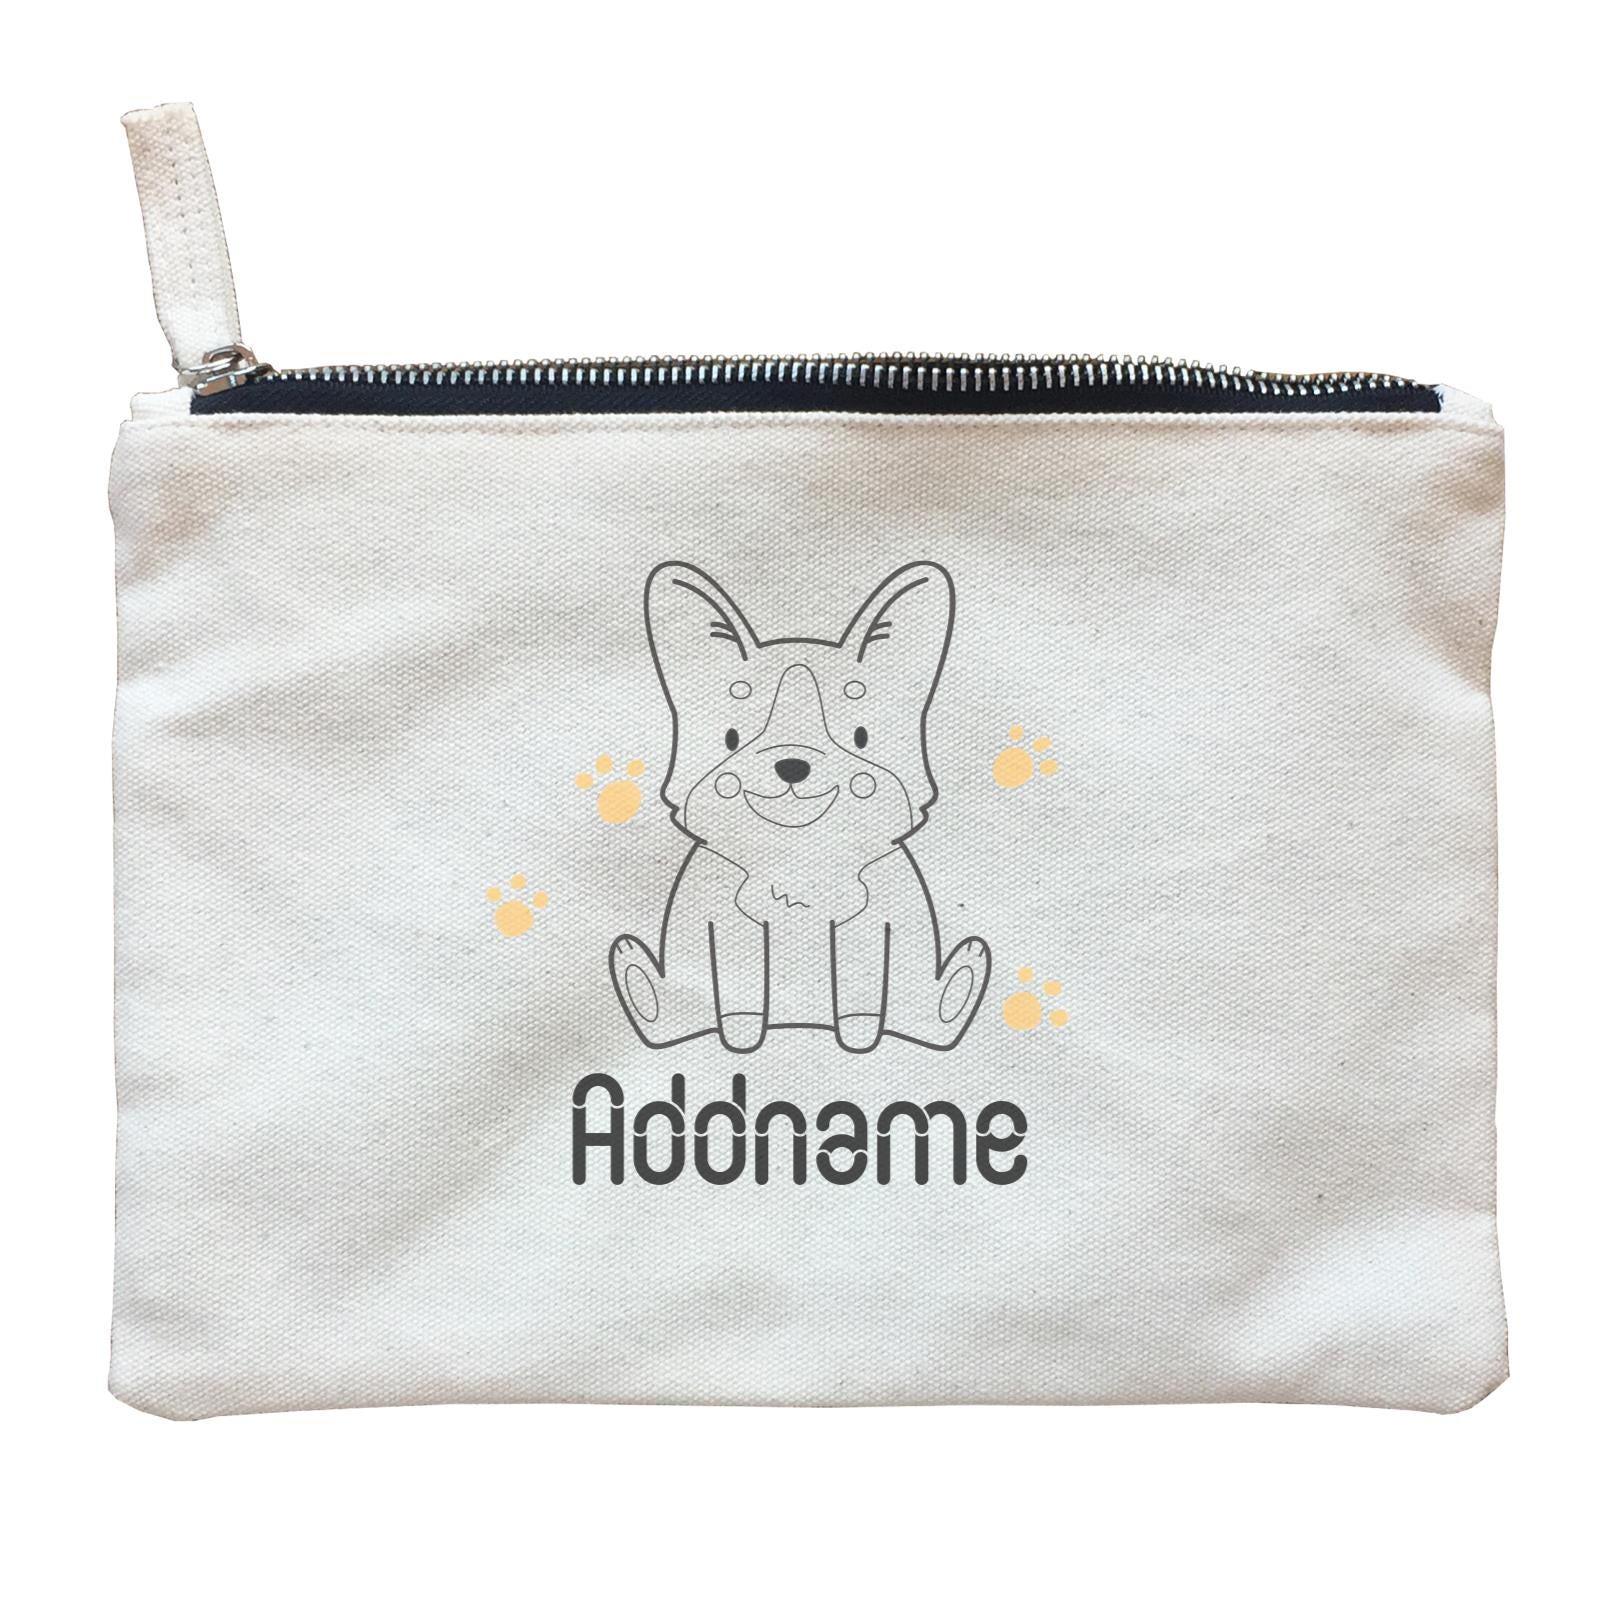 Coloring Outline Cute Hand Drawn Animals Dogs Corgi Addname Zipper Pouch